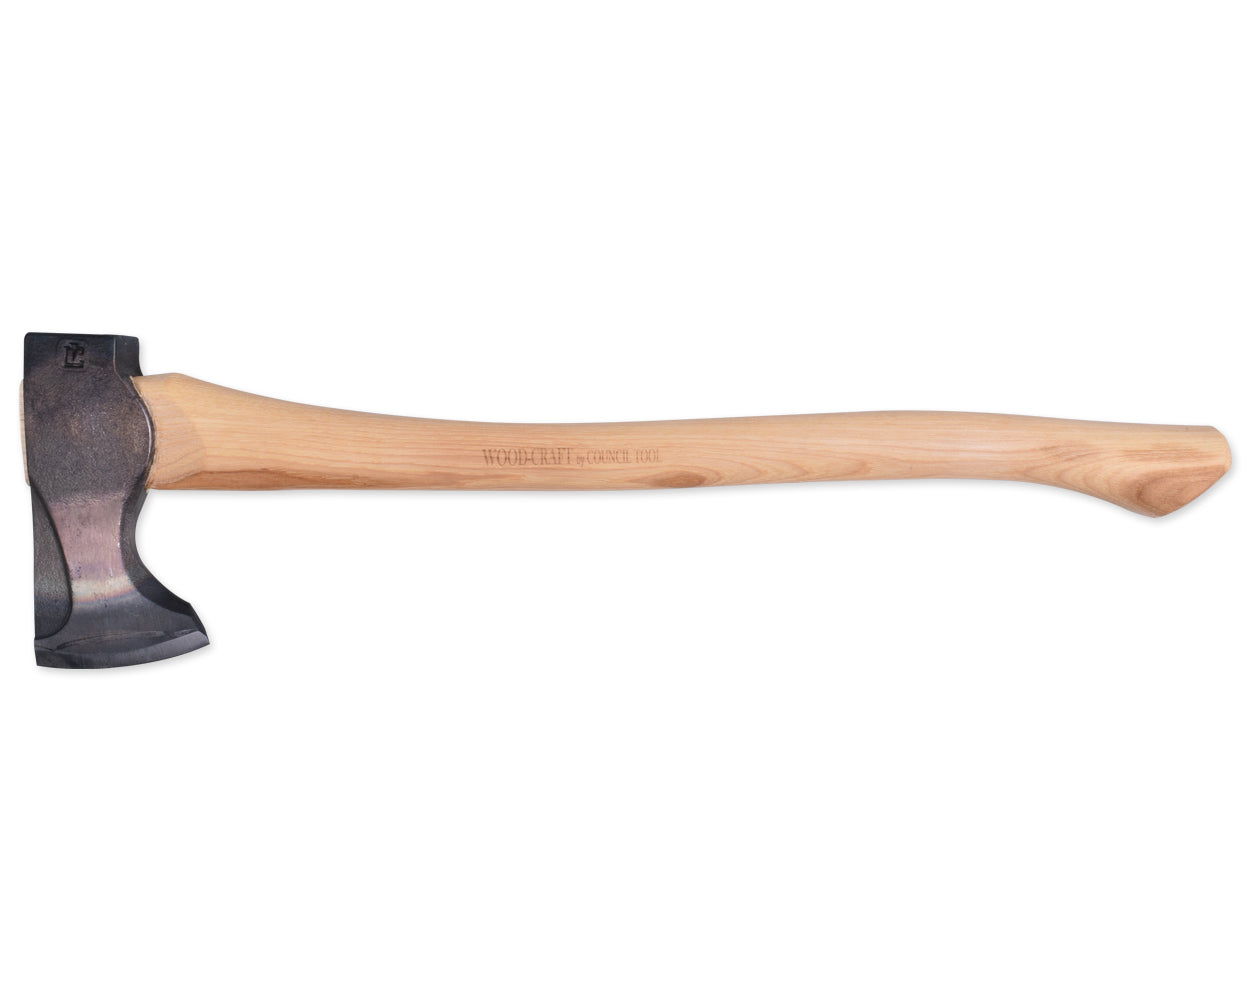 2lb Wood-Craft Pack Axe, 24″ Curved Handle with Leather Mask